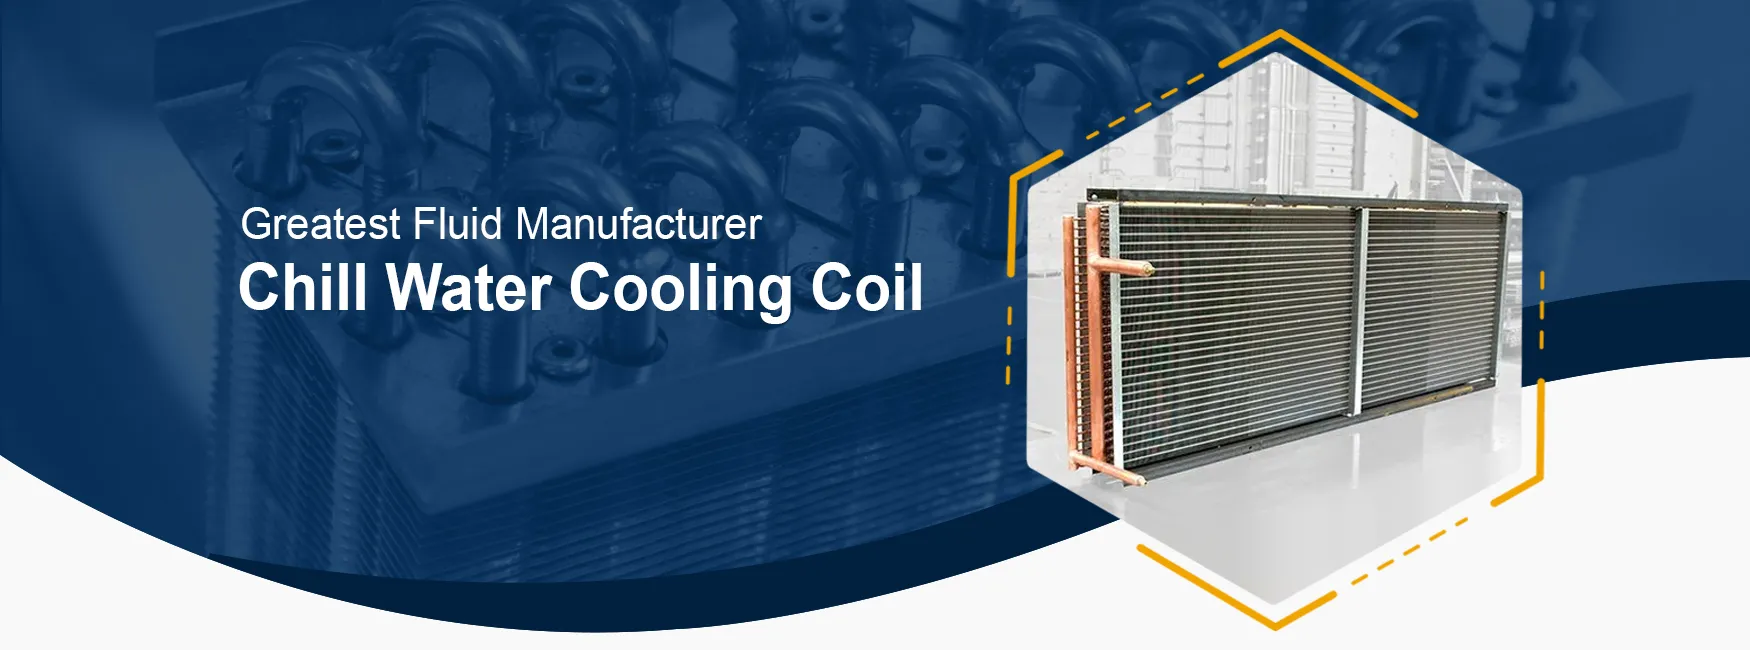 Chilled Water Cooling Coil Manufacturers in Ahmedabad